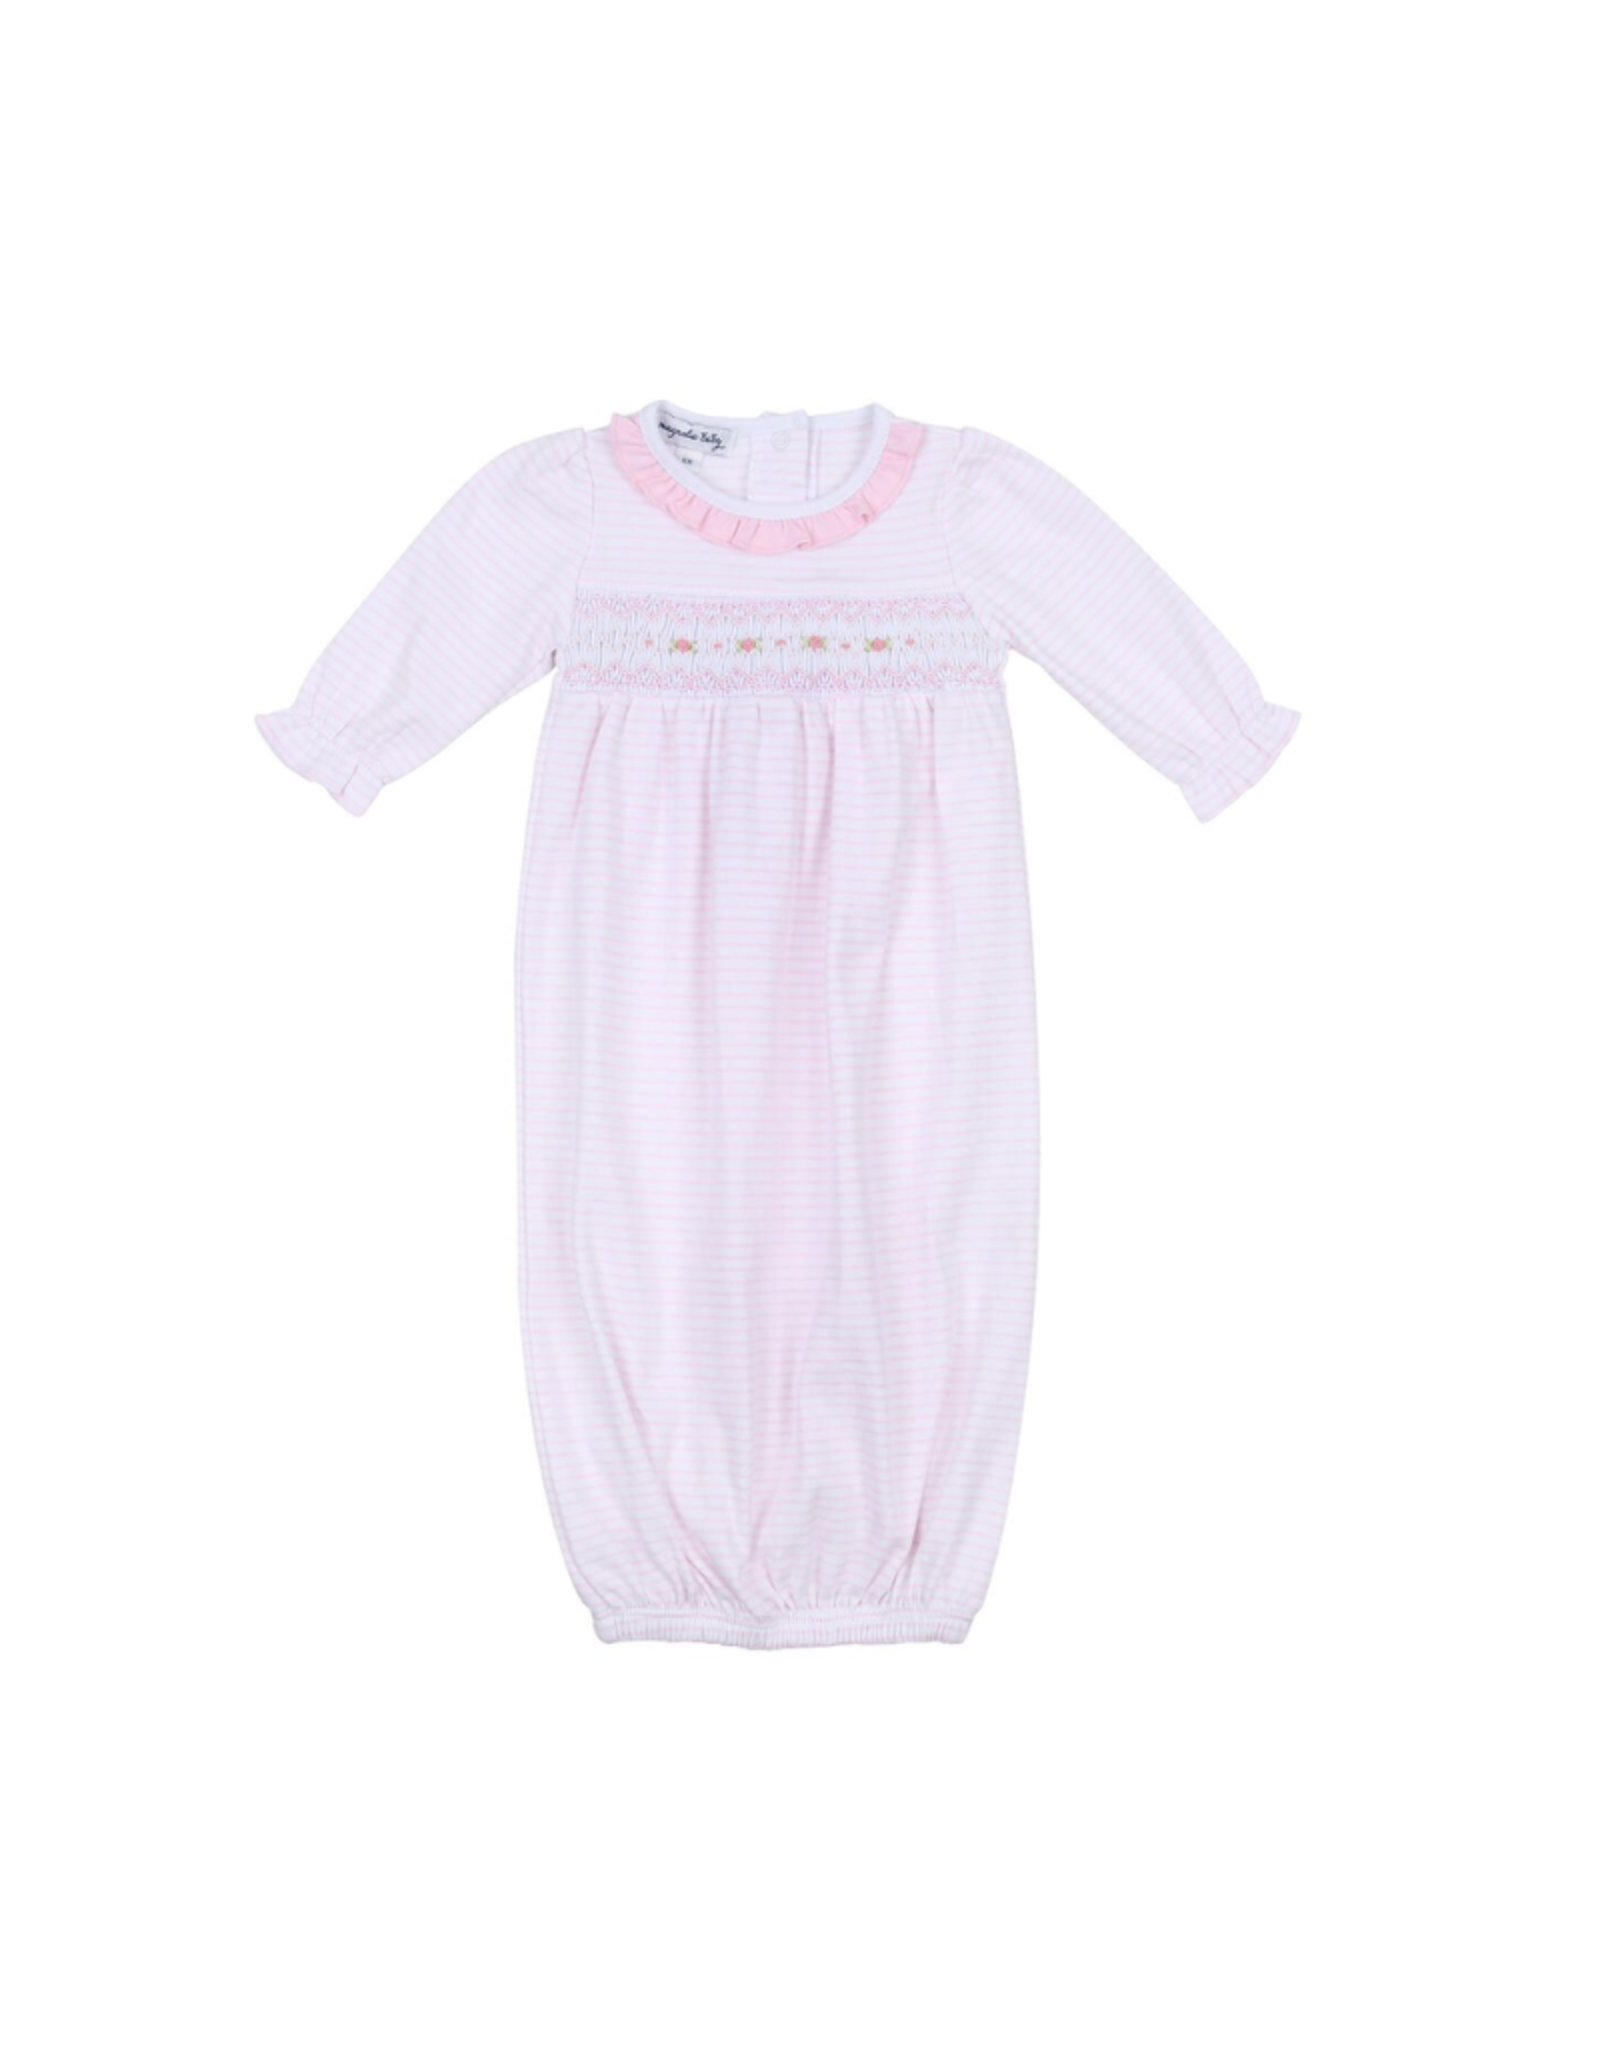 Magnolia Baby Katie & Kyle Pink Long Sleeve Gathered Gown